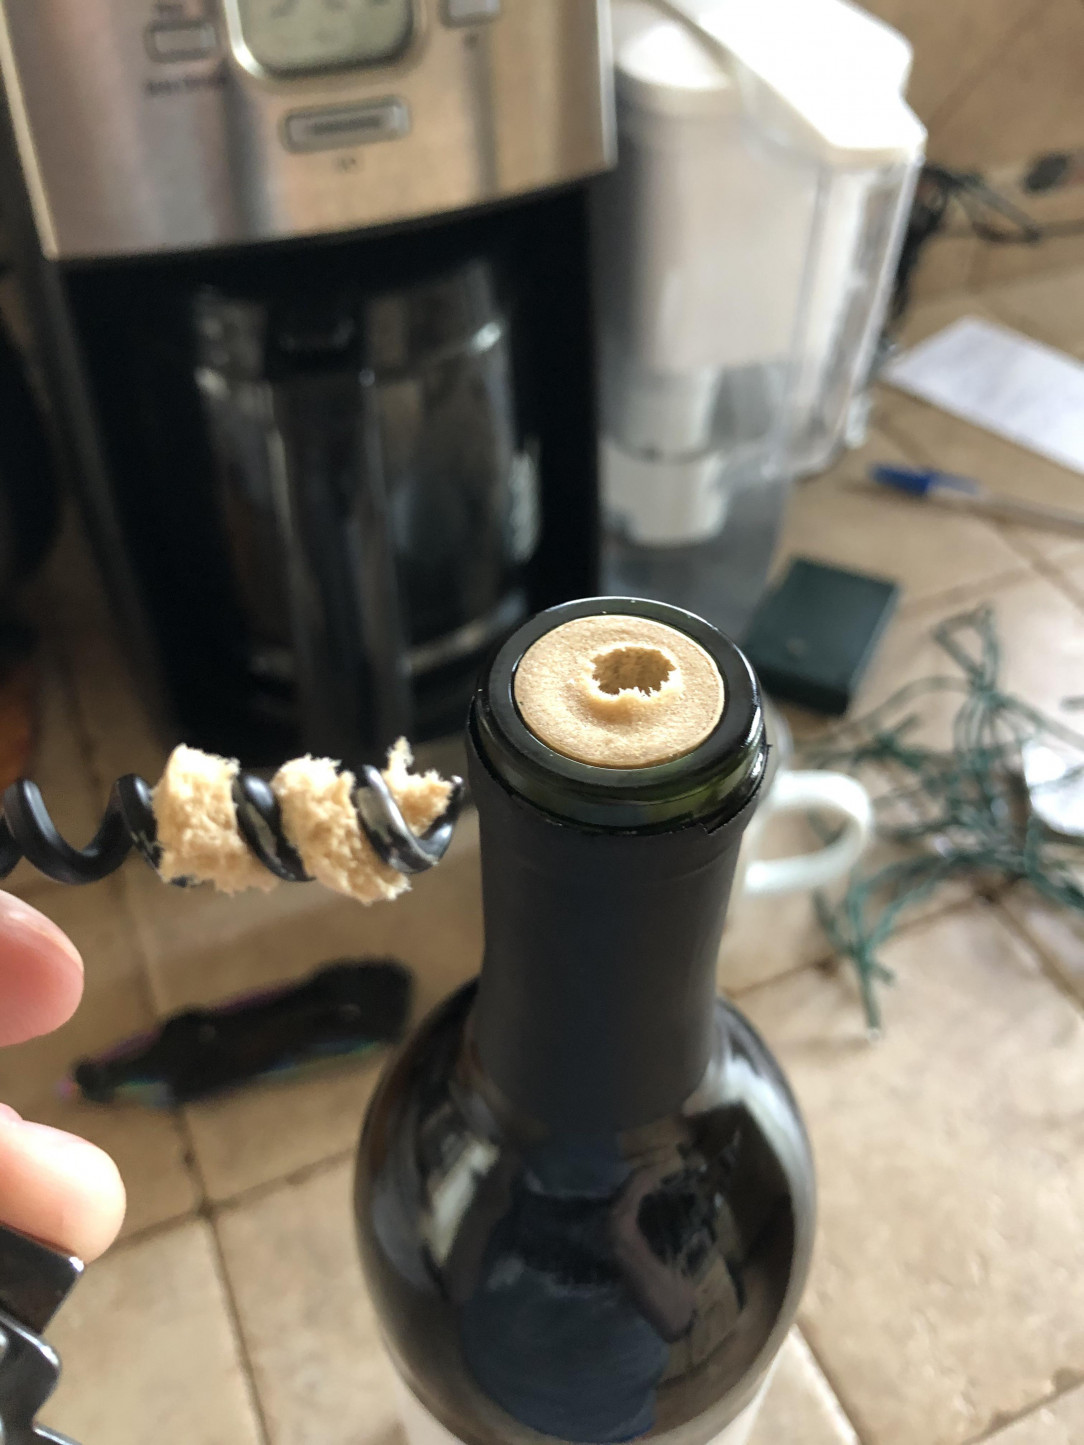 A cheap bottle of wine comes with a cheap cork 😖🥴